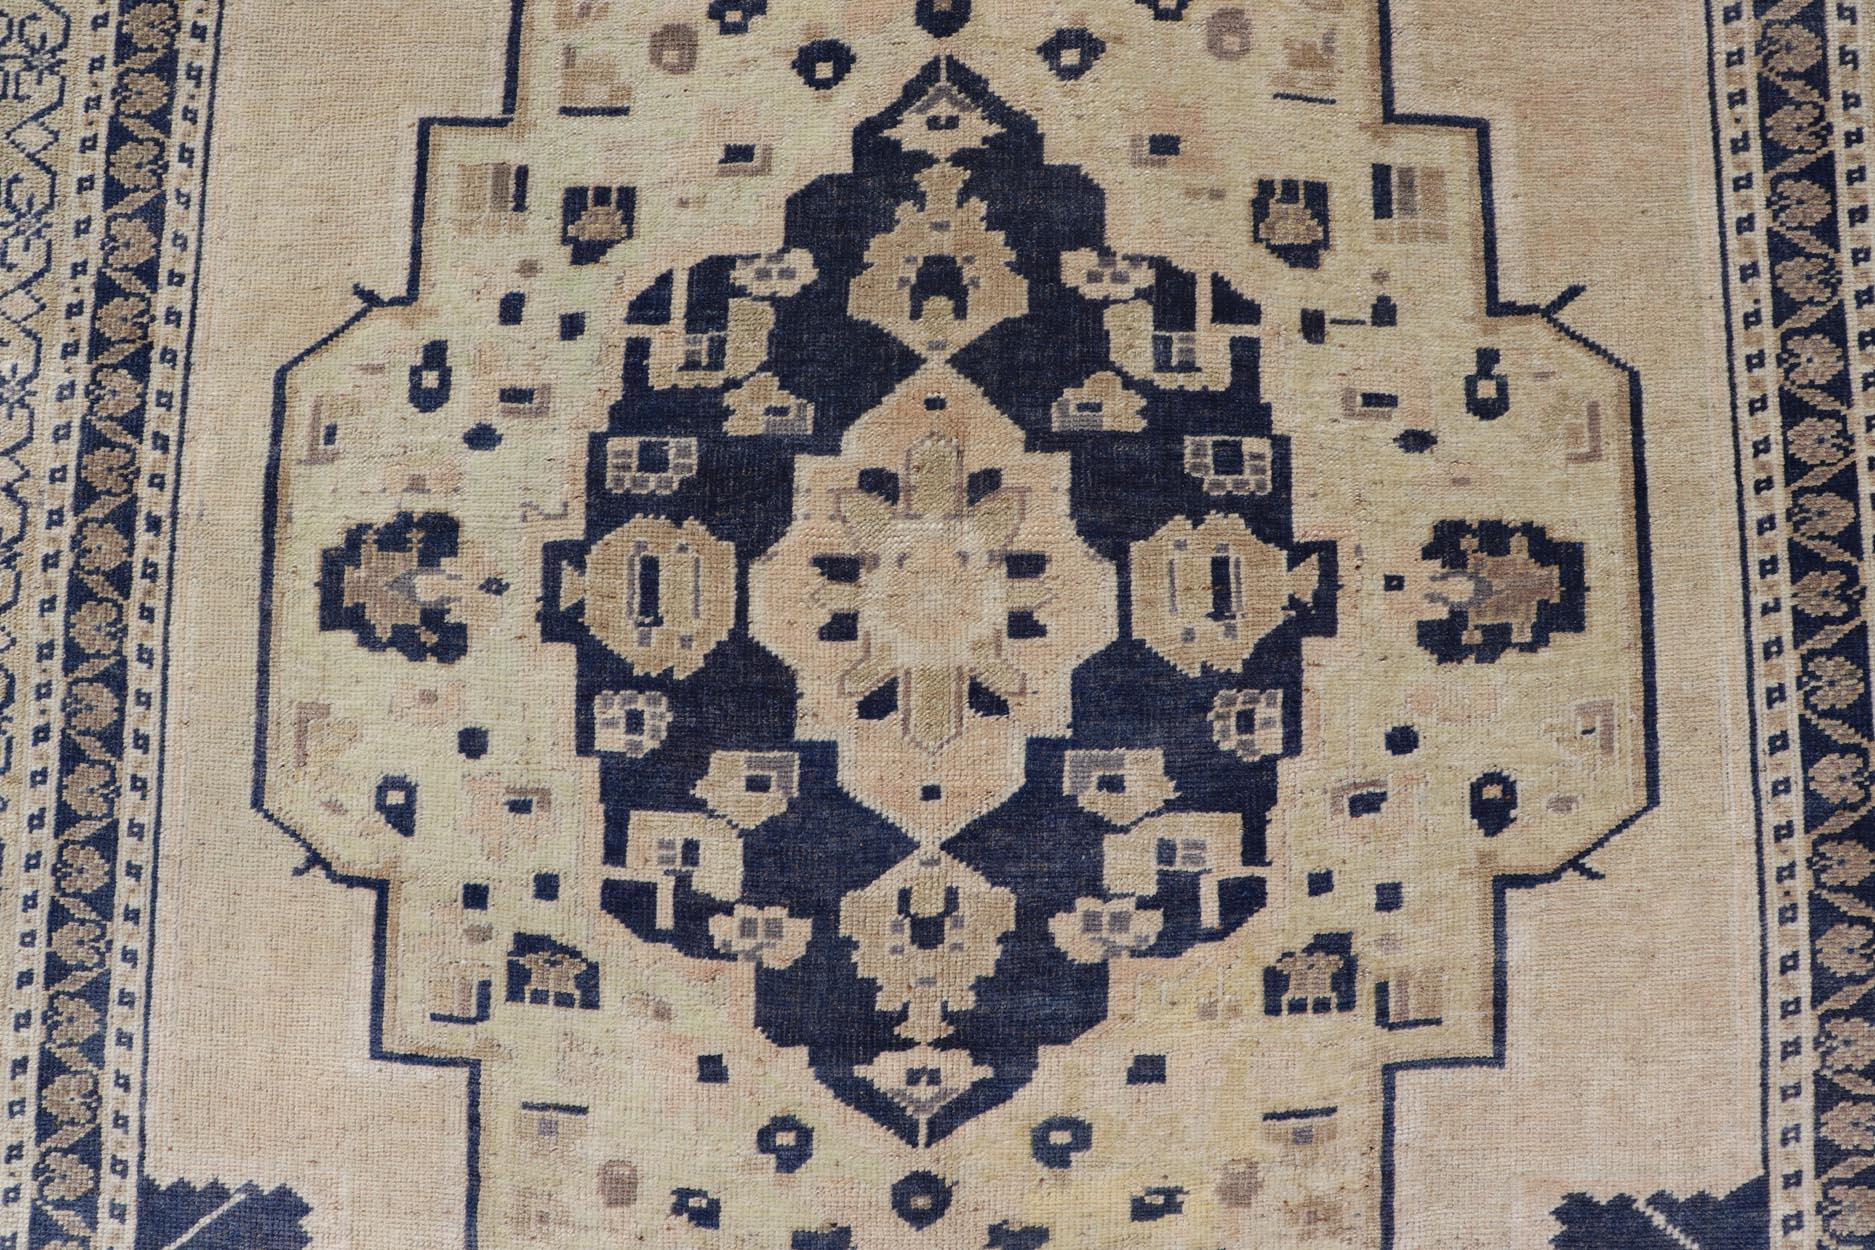 This vintage Turkish Oushak rug has been hand-knotted in wool and features a large central medallion design rendered in blue, cream, tan and ivory tones. A complementary, multi-tiered border encompasses the entirety of the piece; making it a